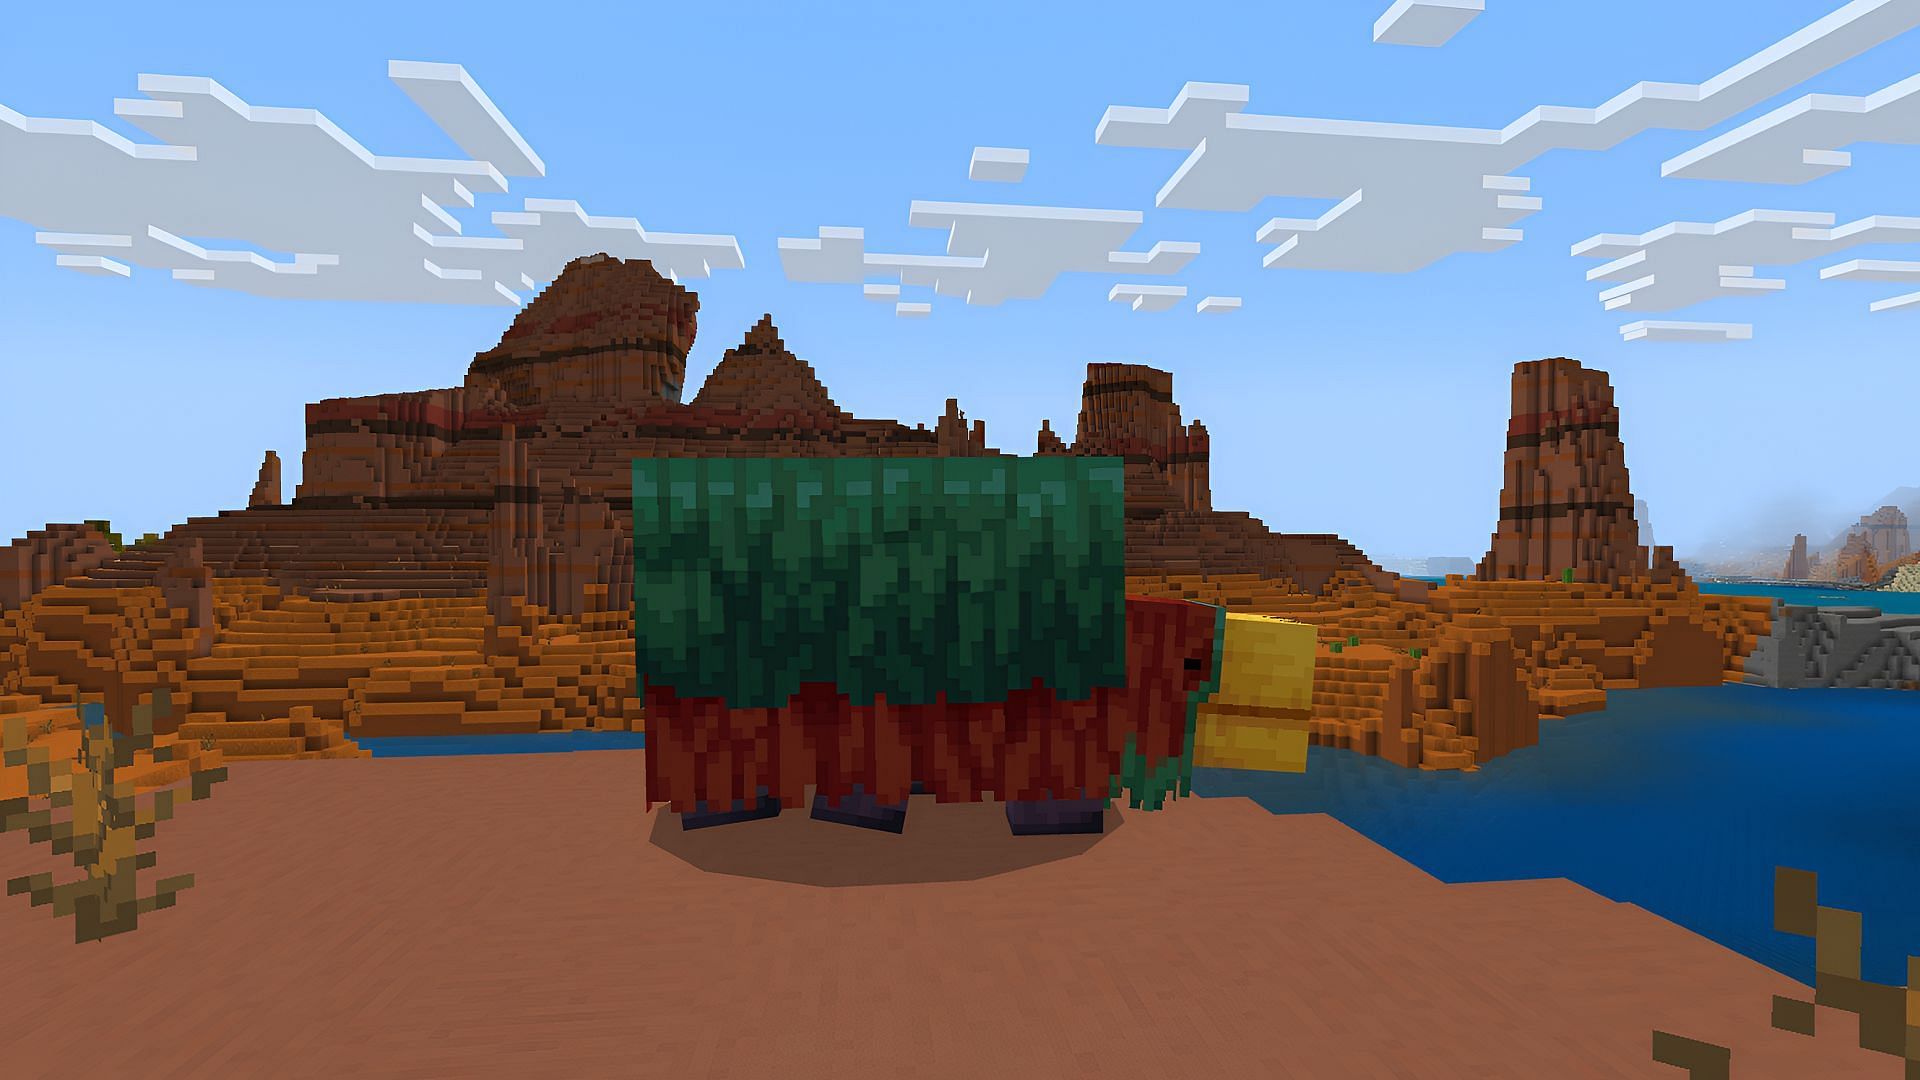 Sniffers received improved functionality with Education Edition gameplay in this Minecraft beta (Image via Mojang)